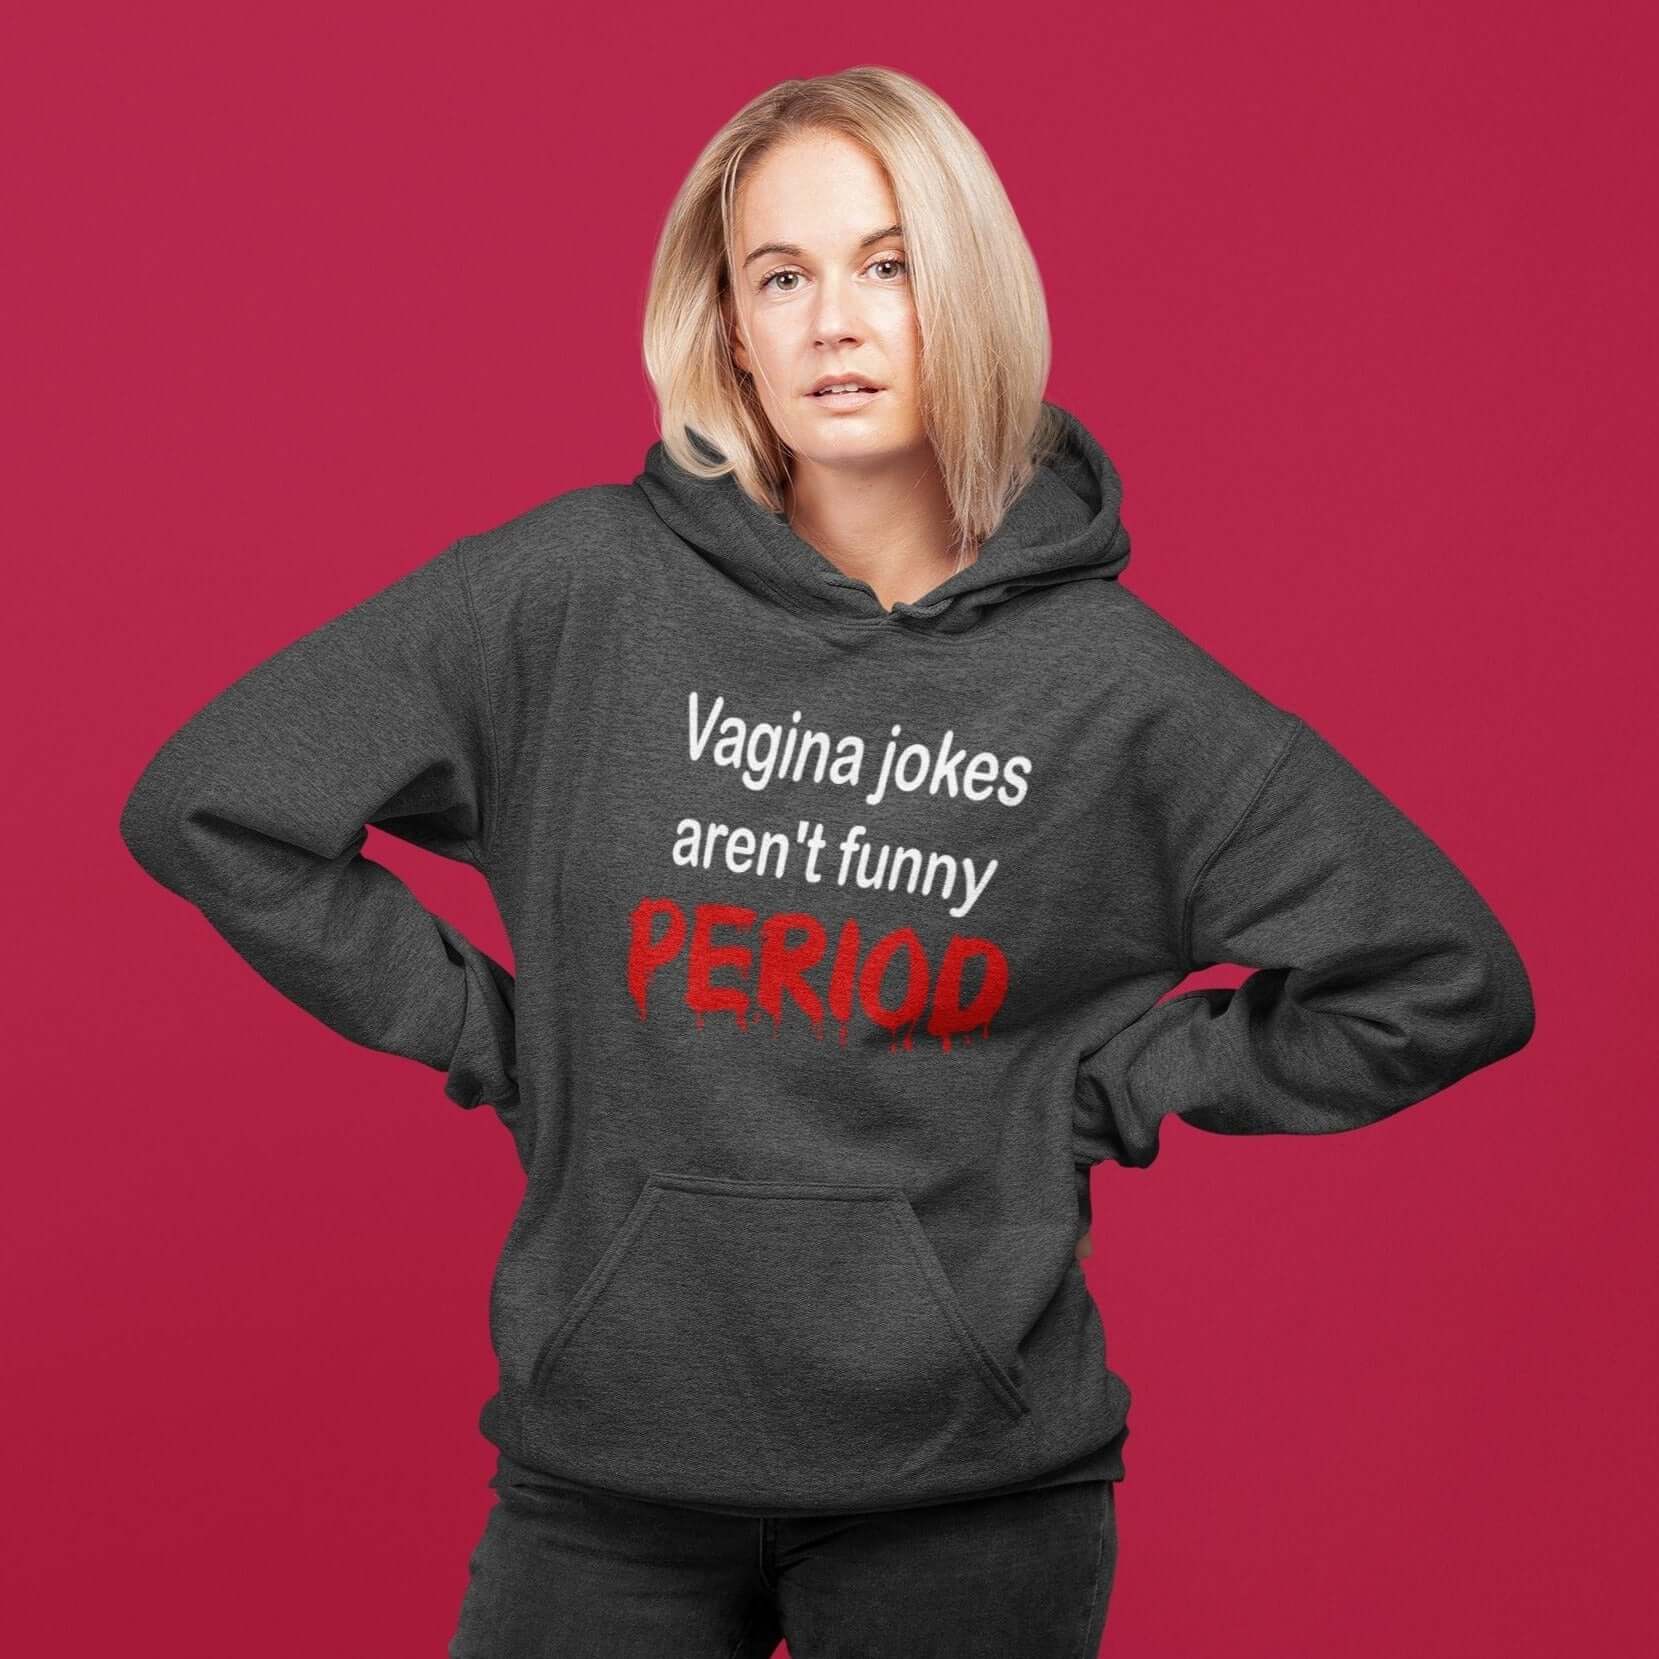 Sassy looking woman wearing a dark heather grey hoodie sweatshirt with the crude phrase Vagina jokes aren't funny...period. The word period is in a red drippy font. The graphics are printed on the front of the hoodie.